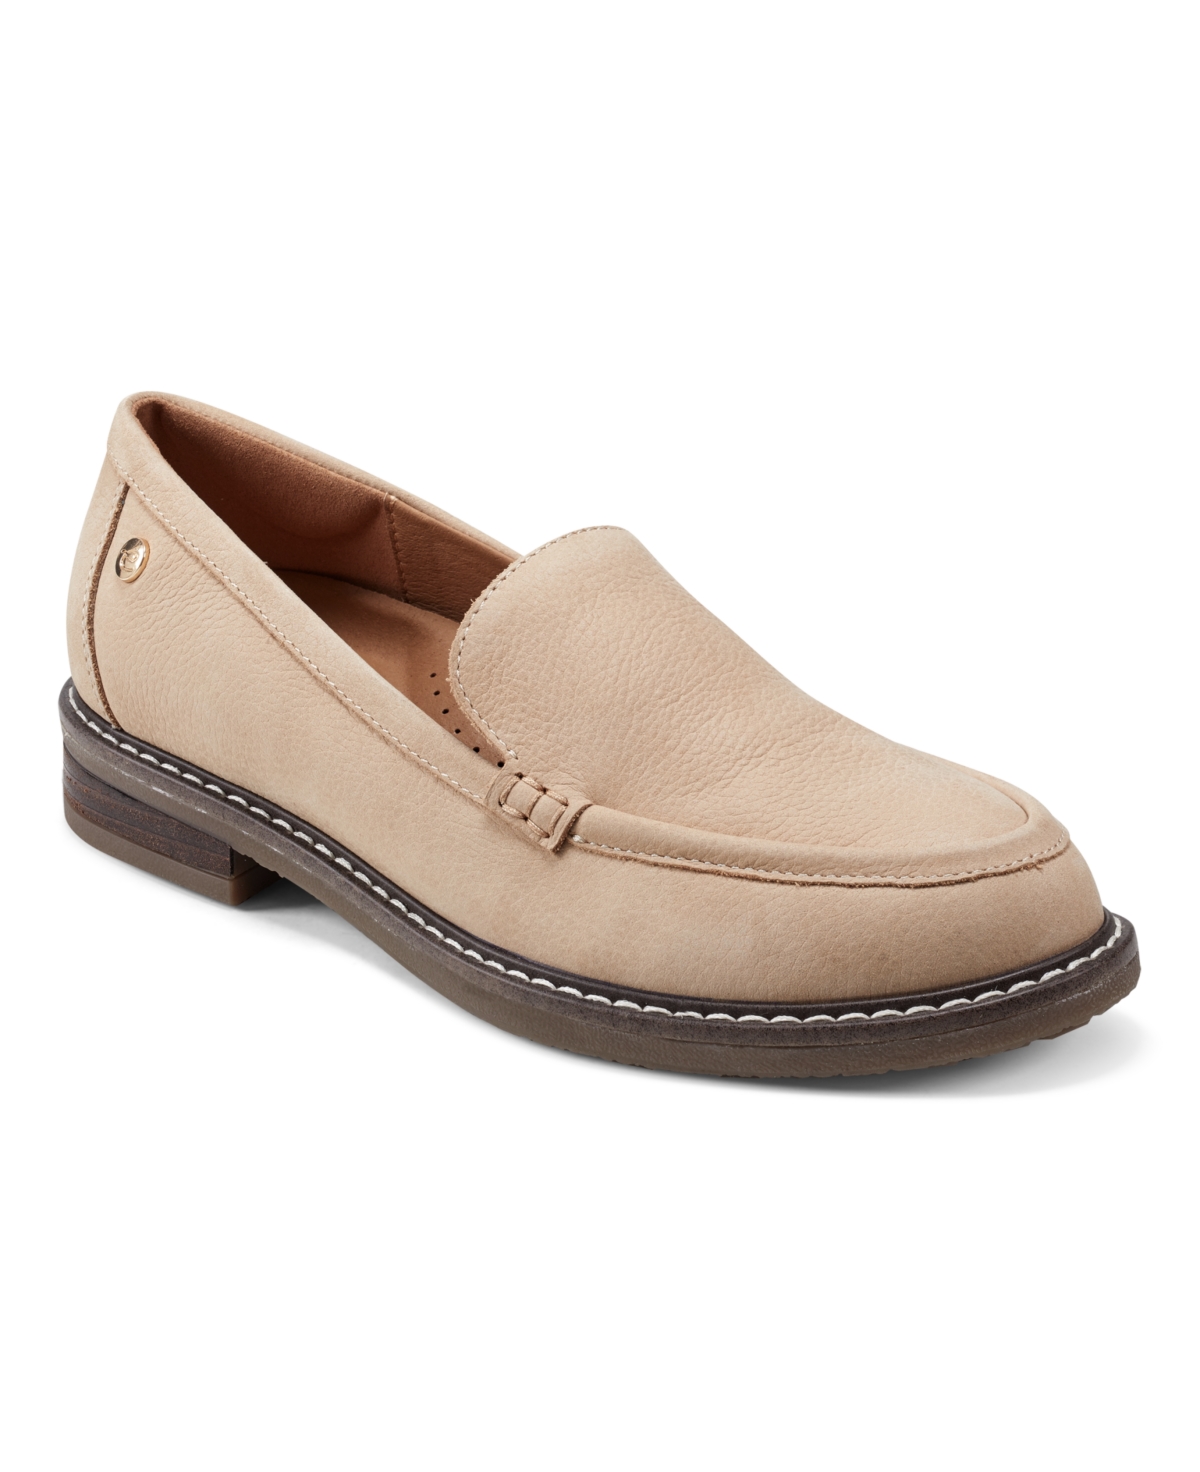 Women's Eflex Jaylin Round Toe Slip-On Casual Loafers - Medium Natural Leather- Leather